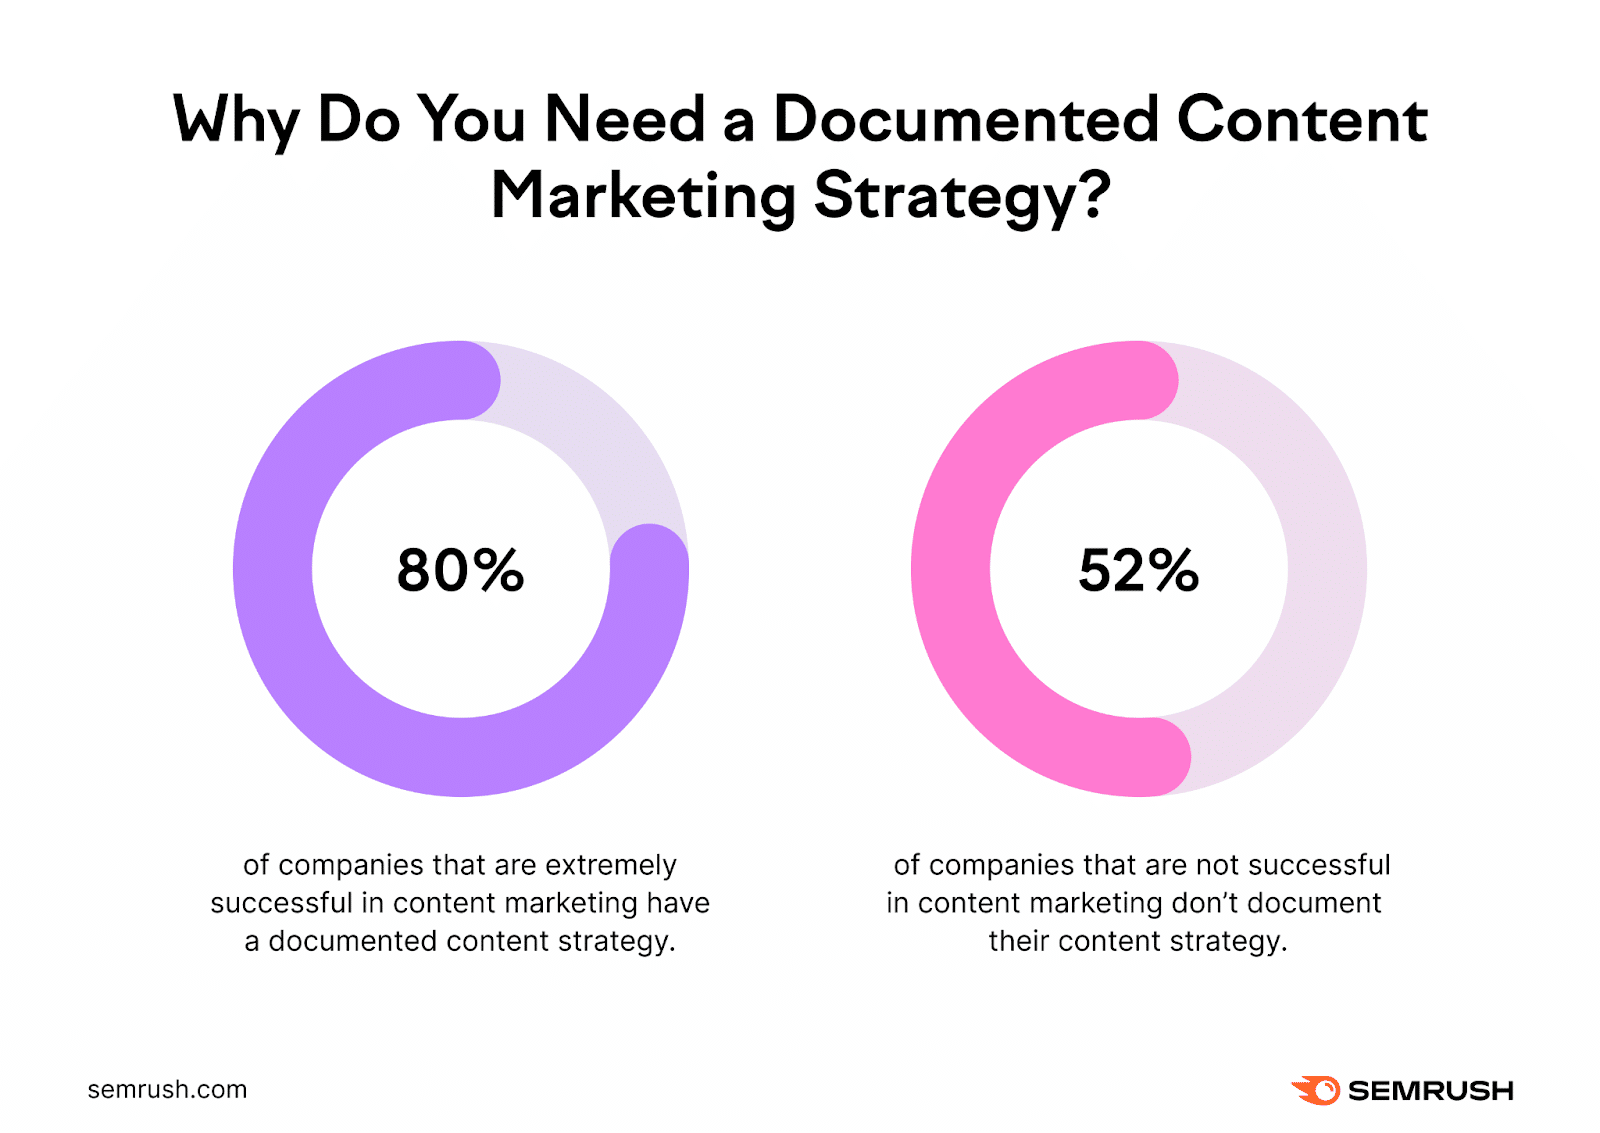 You need a documented strategy to compete with other companies and create content that converts.